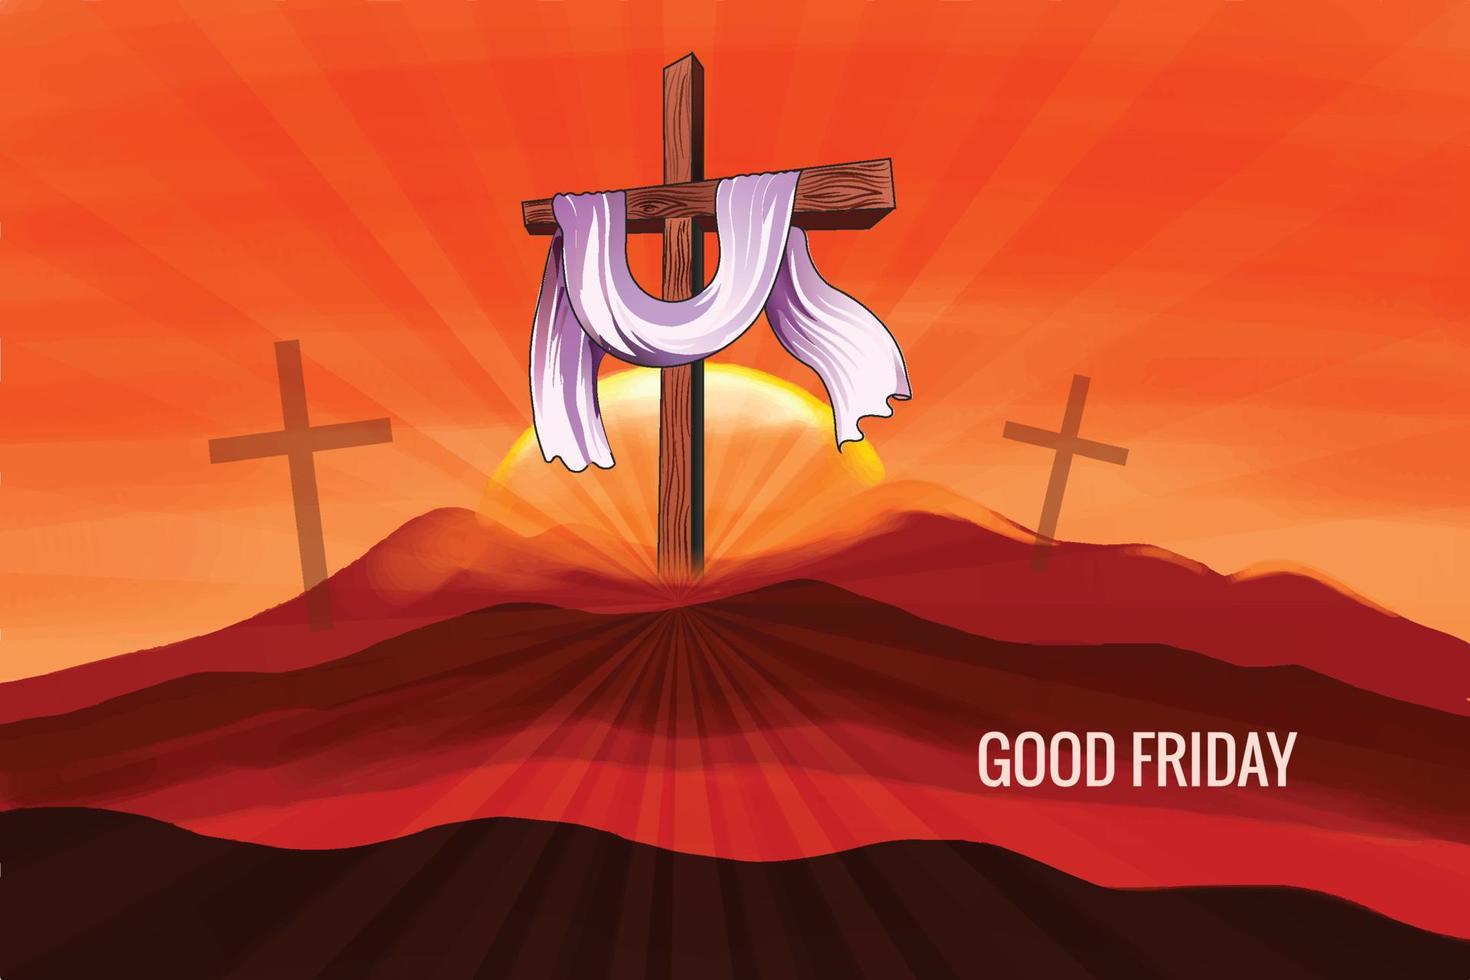 Celebrate good friday greeting card background vector